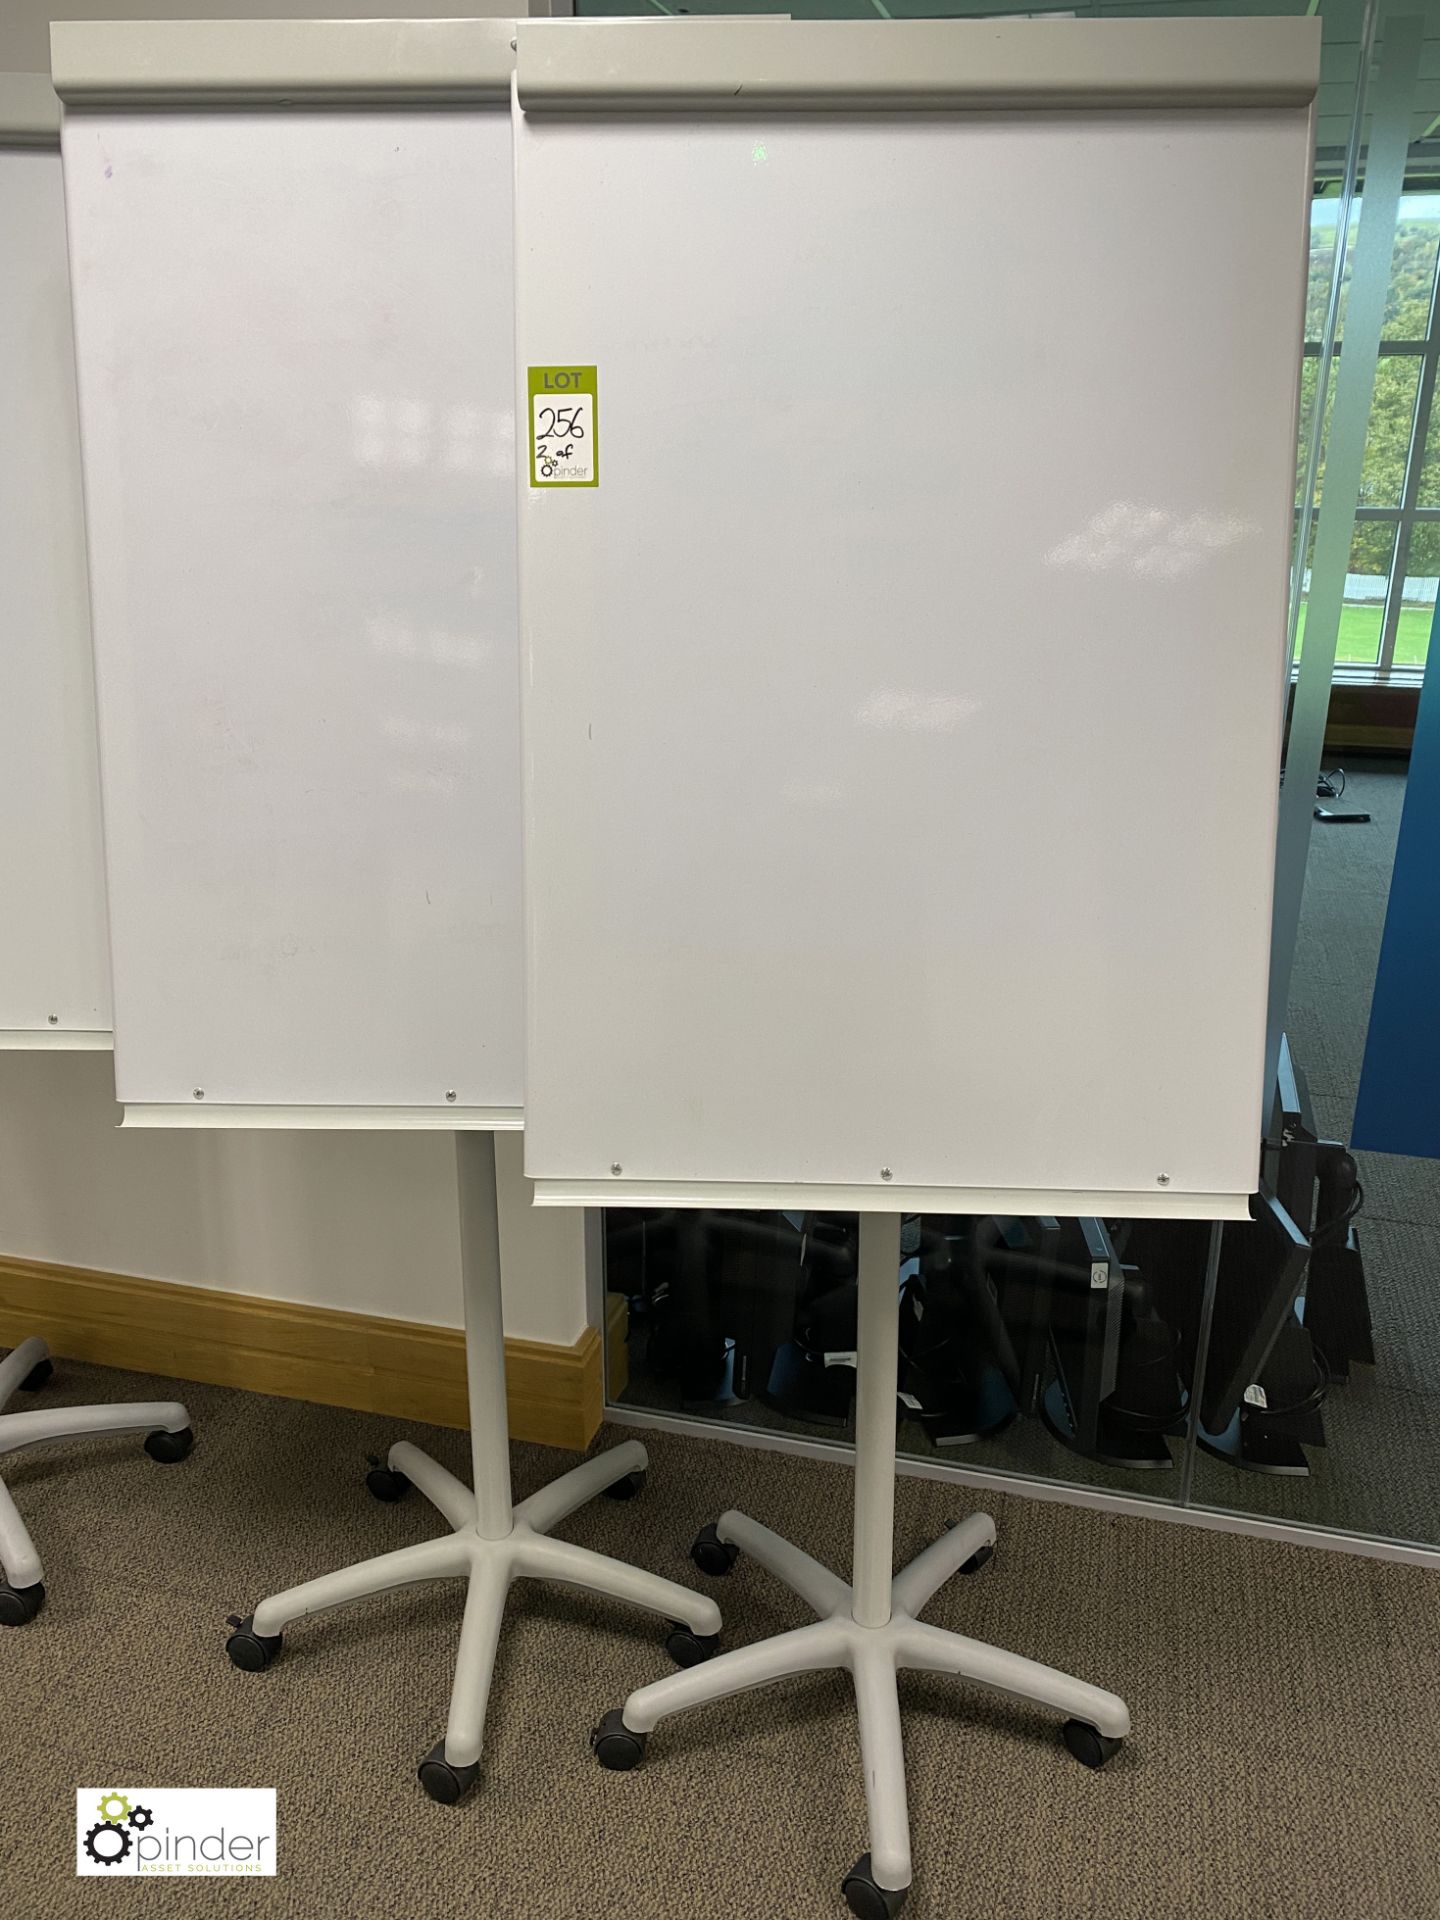 Pair adjustable magnetic Flip Chart Easels (located on 3rd floor)